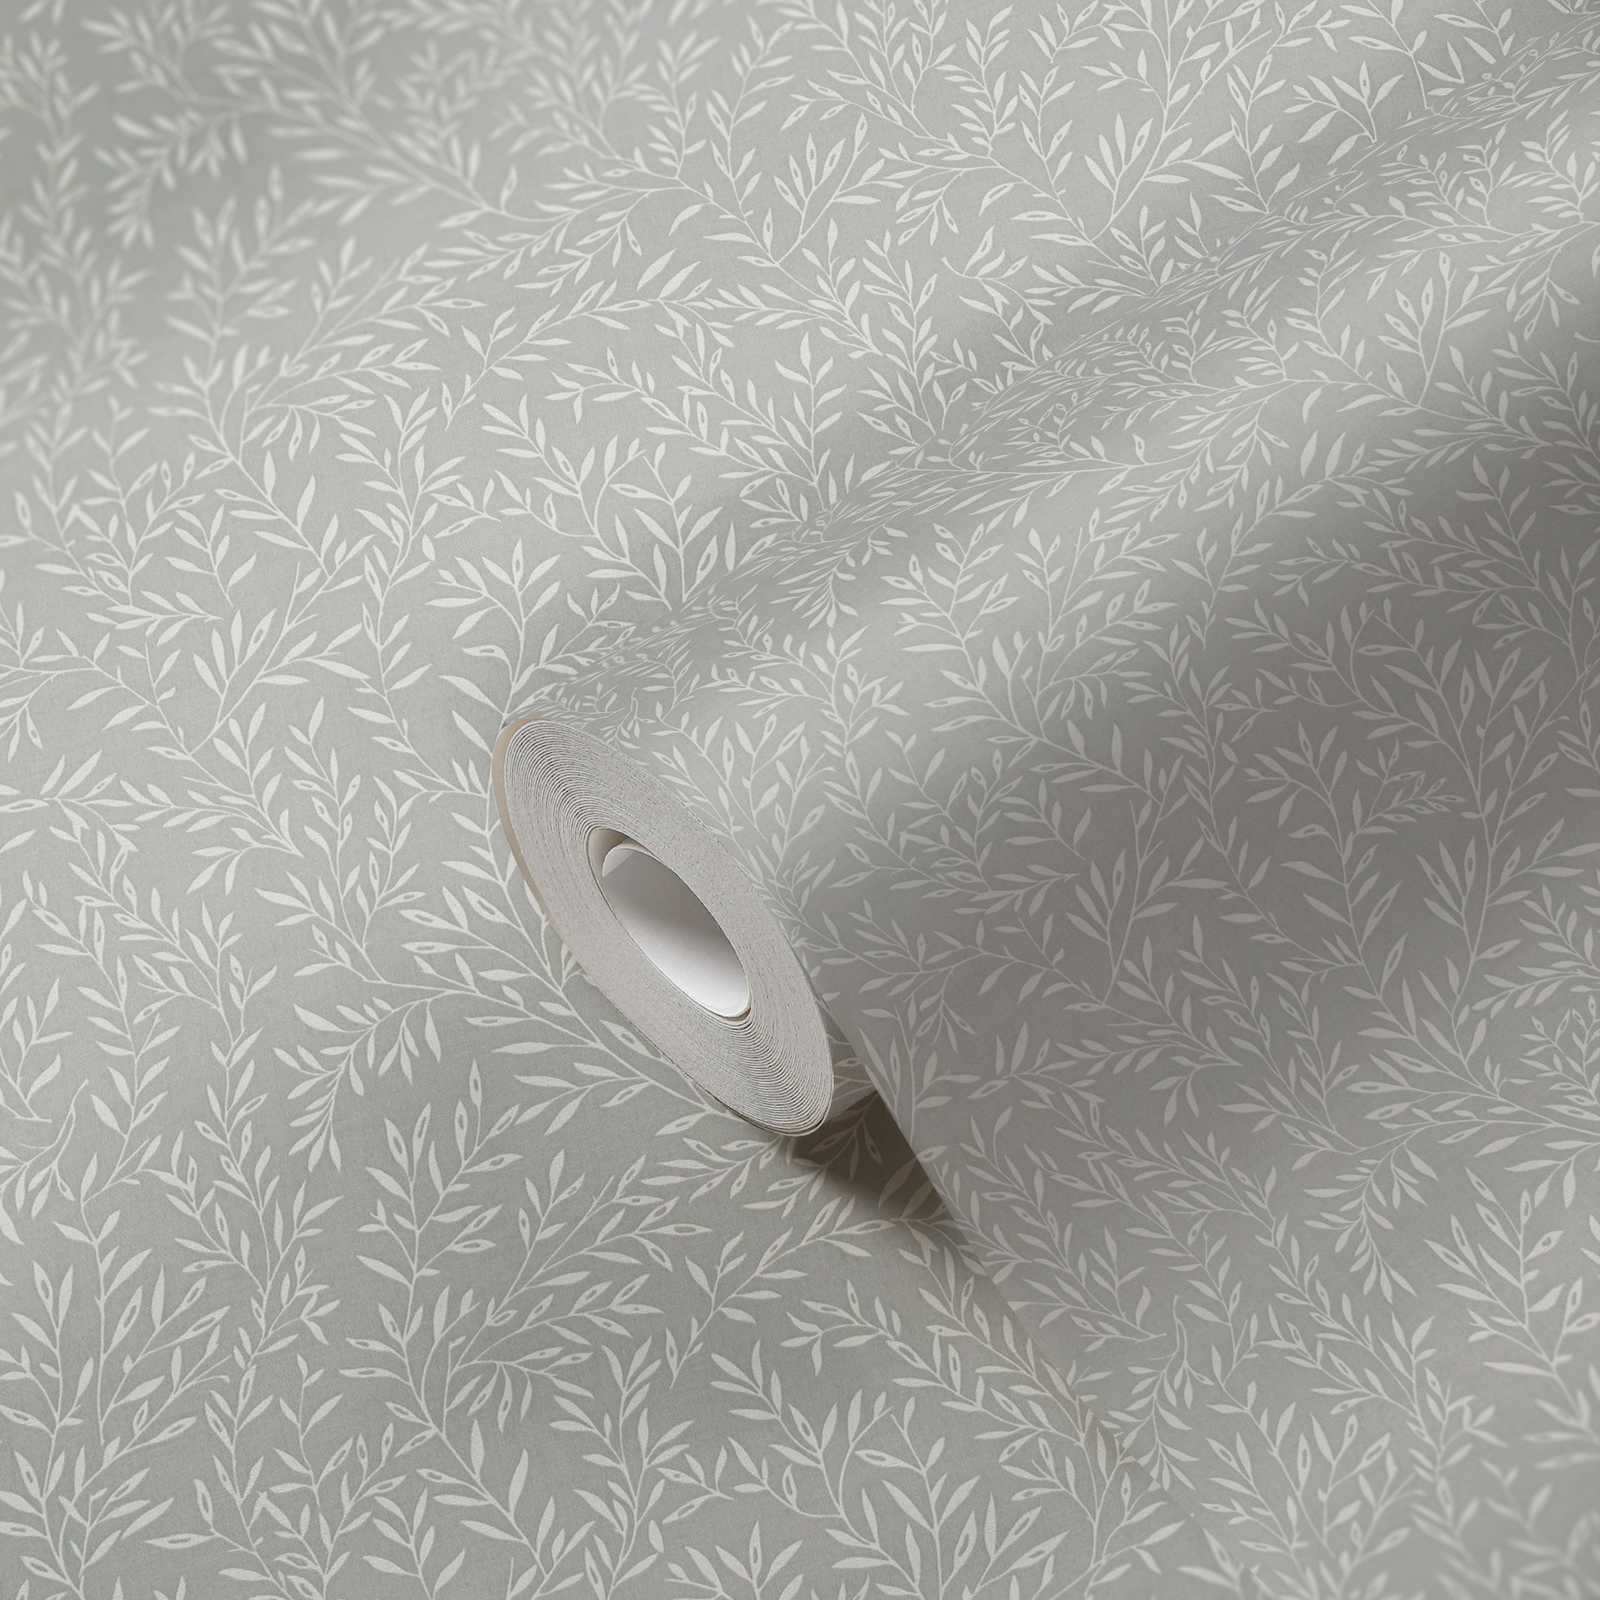             Wallpaper with leaf tendrils in country style - grey, white
        